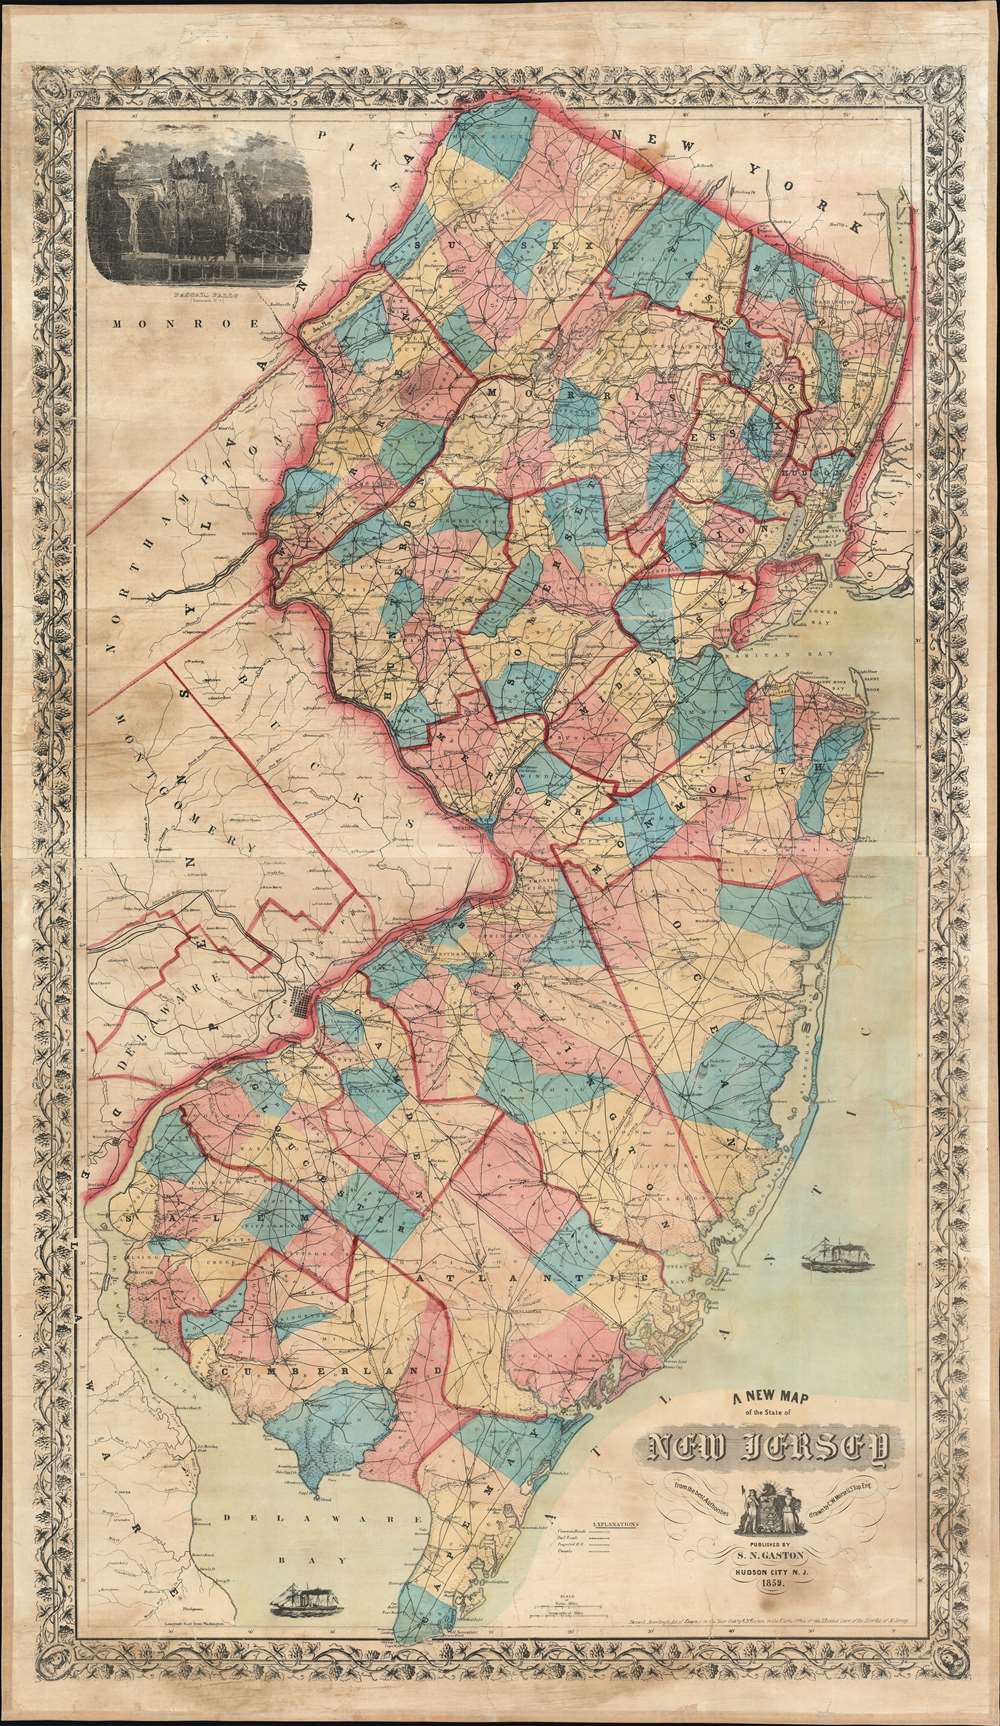 A New Map of the State of New Jersey. - Main View